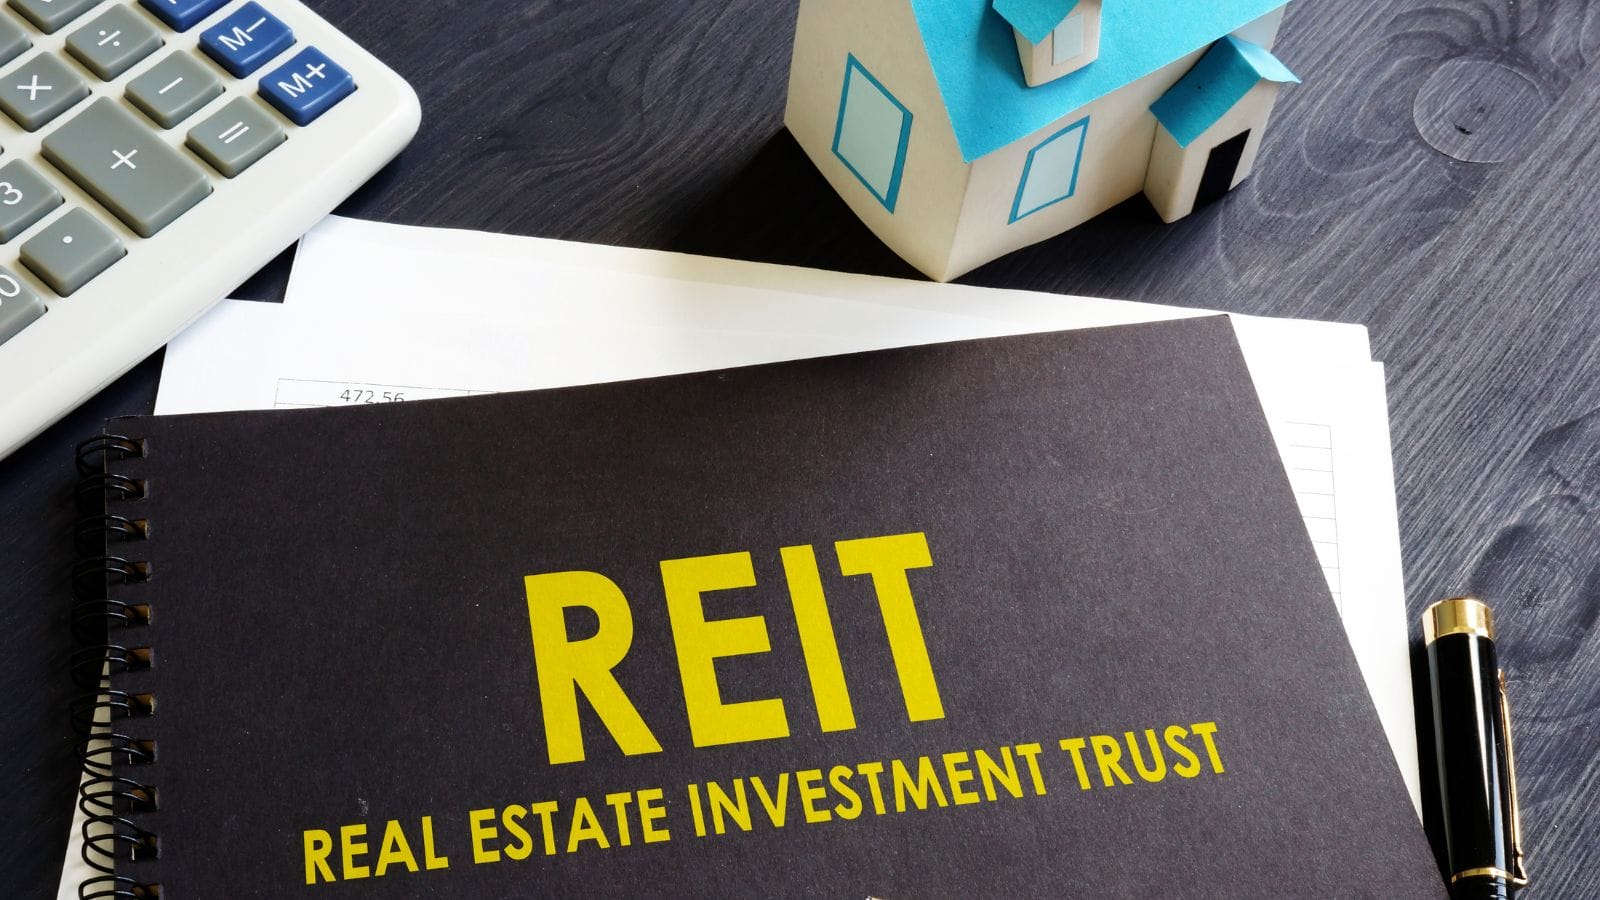 A picture containing the word REIT

